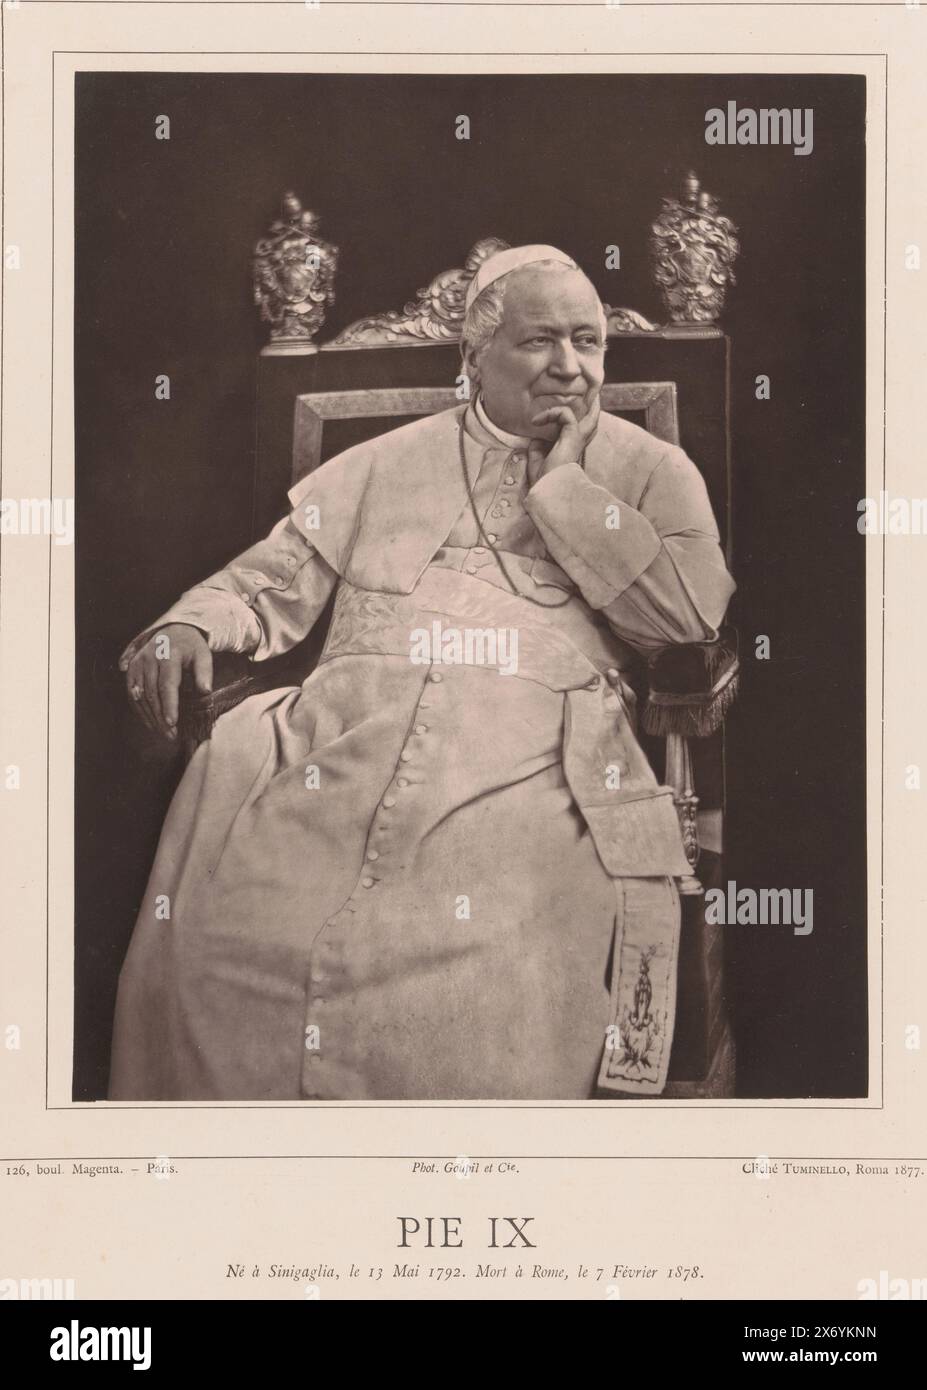 Portrait of Pope Pius IX, Pie IX (title on object), photomechanical print, Ludovico Tuminello, (mentioned on object), Goupil & Cie., (mentioned on object), c. 1873 - in or before 1878, paper, height, 233 mm × width, 180 mm Stock Photo